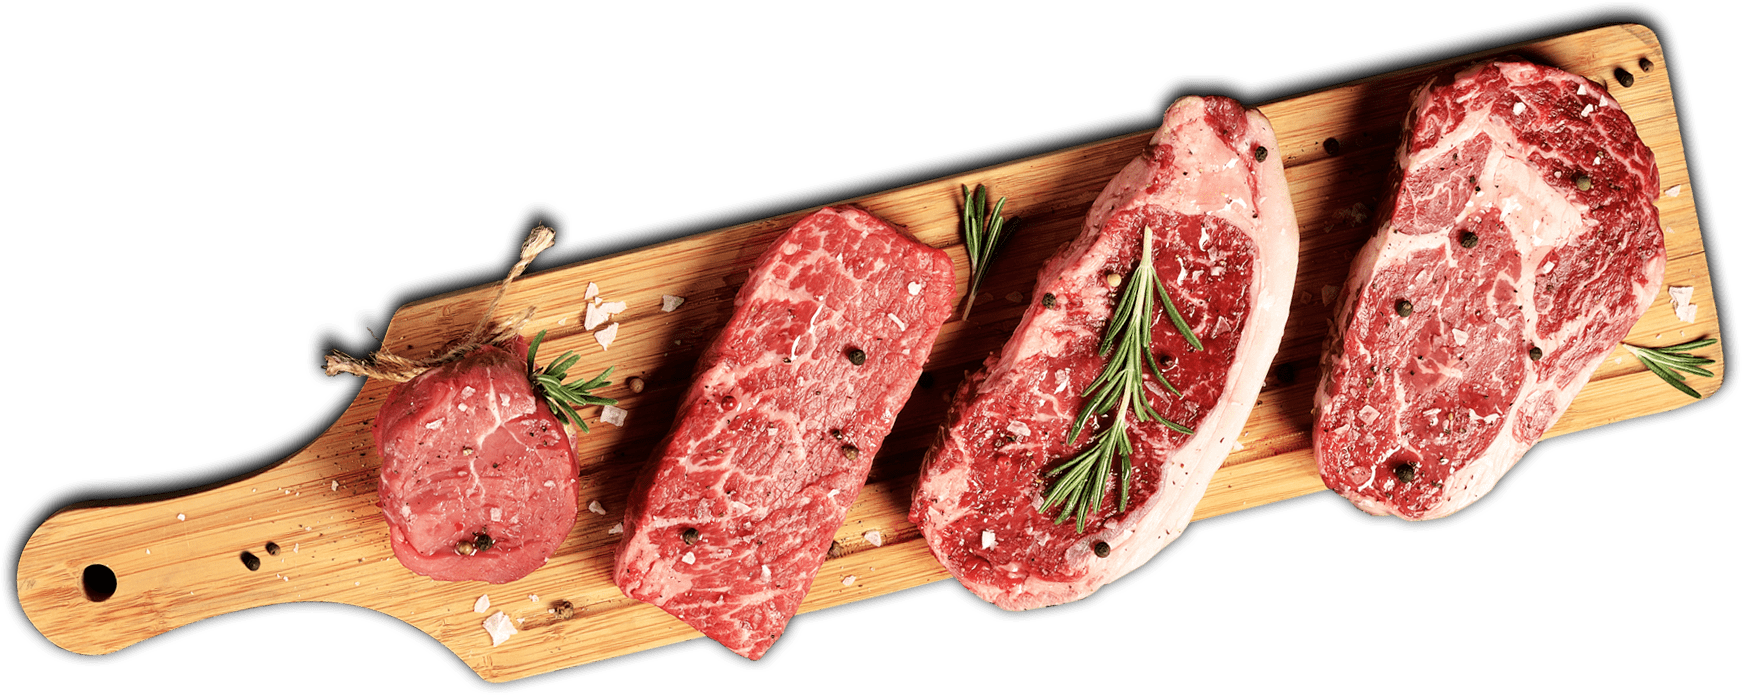 Is Red Meat *Really* Bad for You? - Shape Magazine | Shape